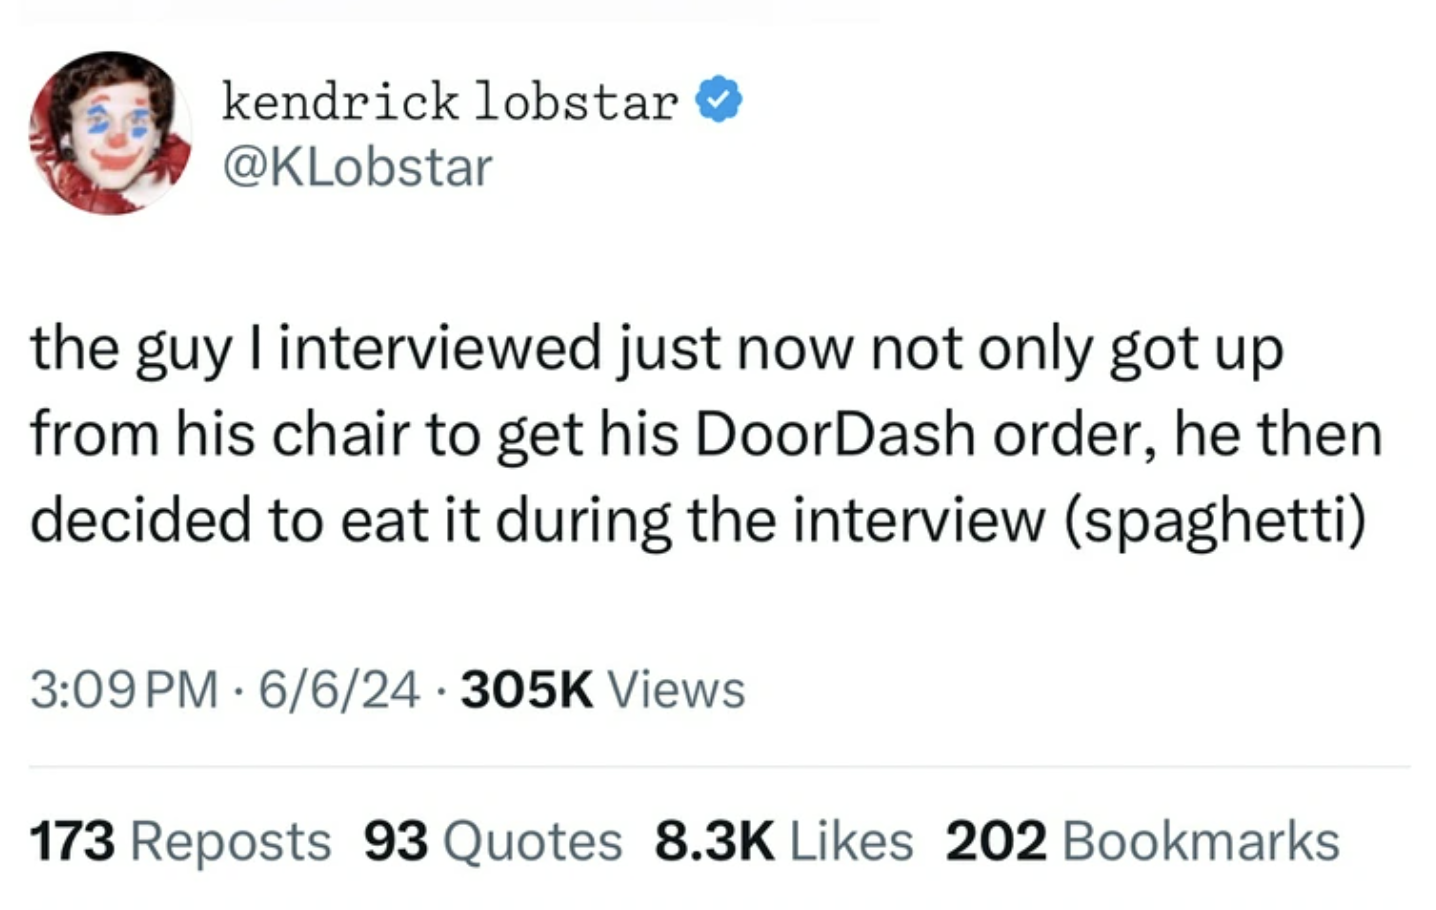 screenshot - kendrick lobstar the guy I interviewed just now not only got up from his chair to get his DoorDash order, he then decided to eat it during the interview spaghetti 66 Views 173 Reposts 93 Quotes 202 Bookmarks